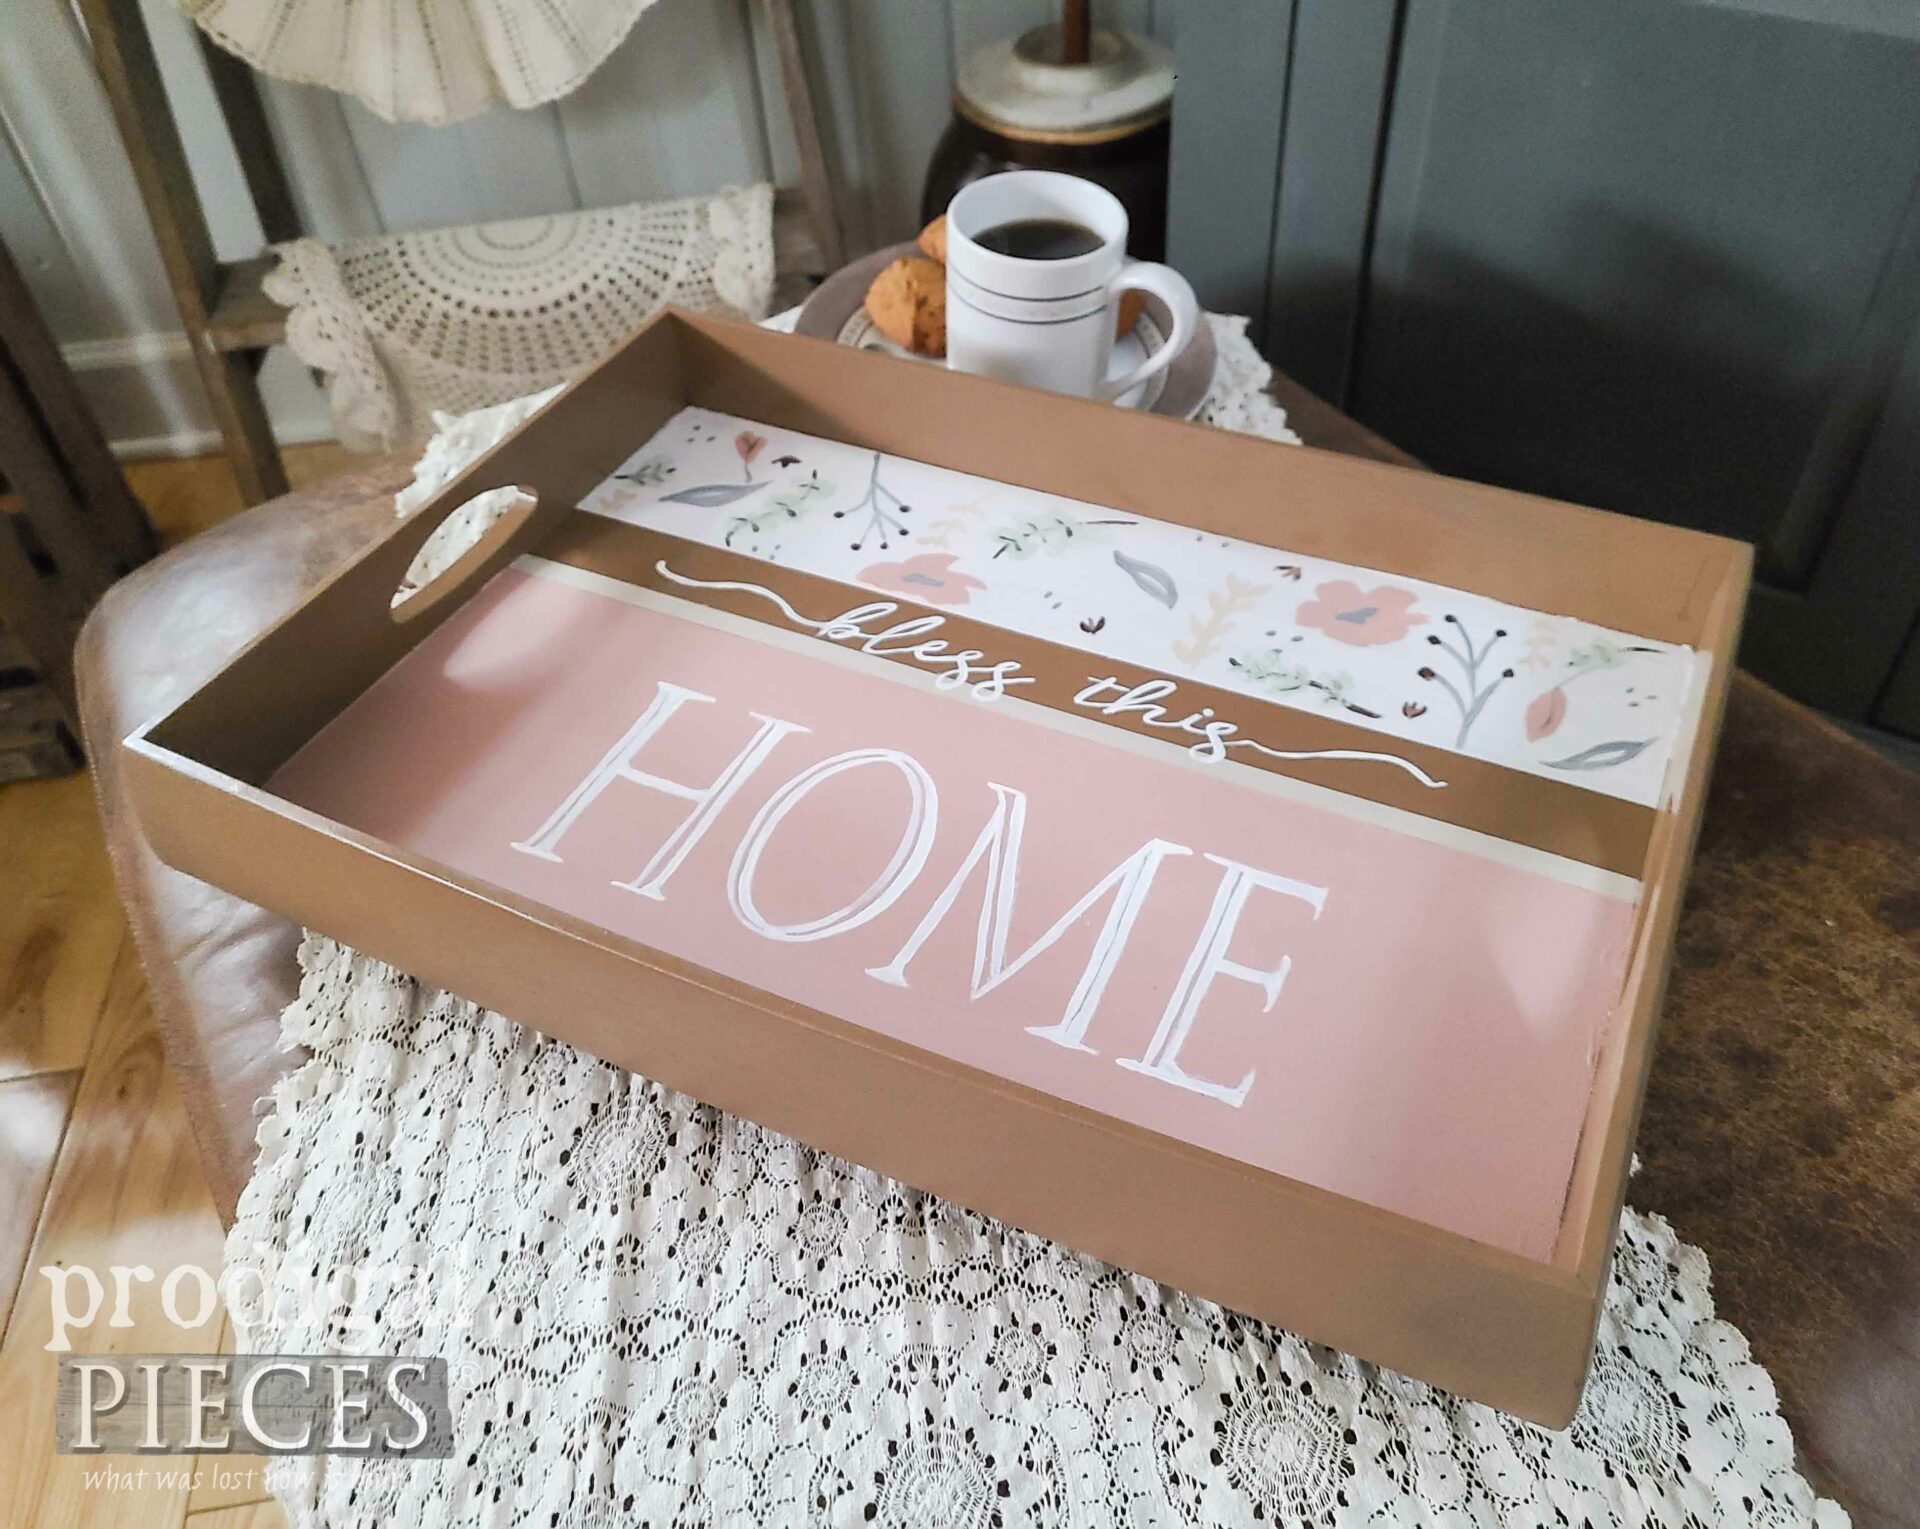 Freehand Painted Serving Tray from Thrift Store Find by Larissa of Prodigal Pieces | prodigalpieces.com #prodigalpieces #diy #thrifted #farmhouse